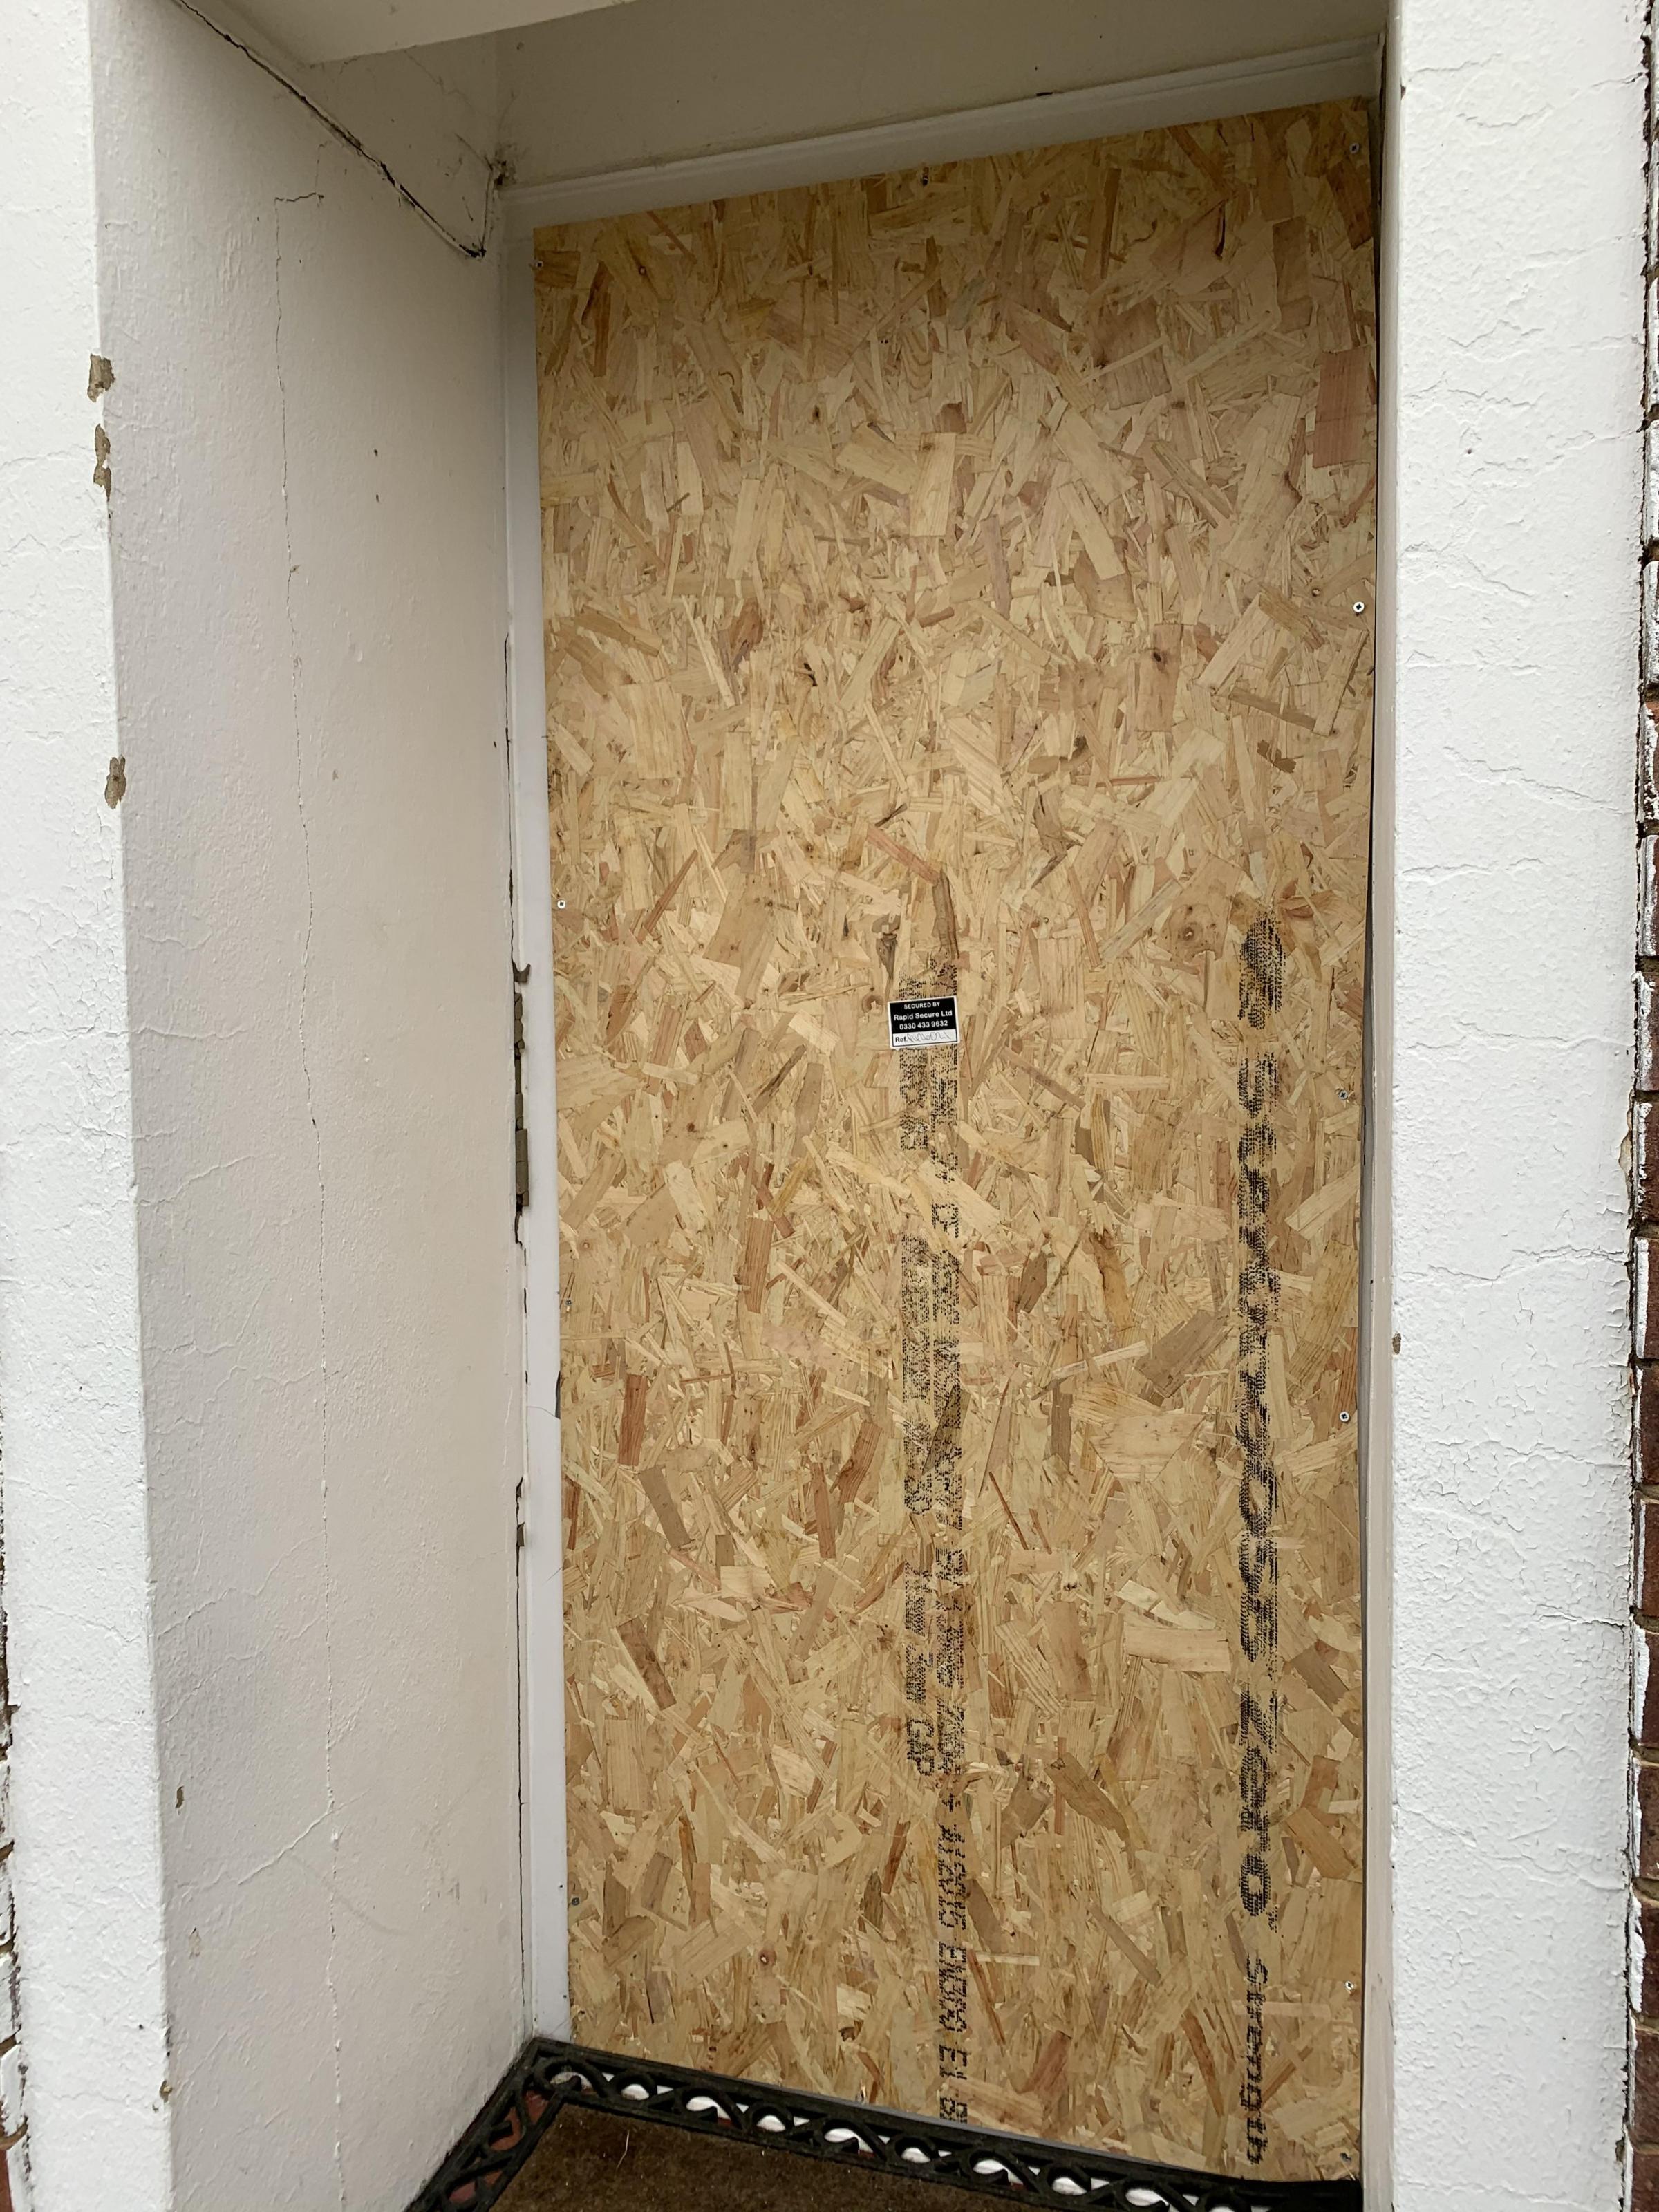 The boarded up door after the raid